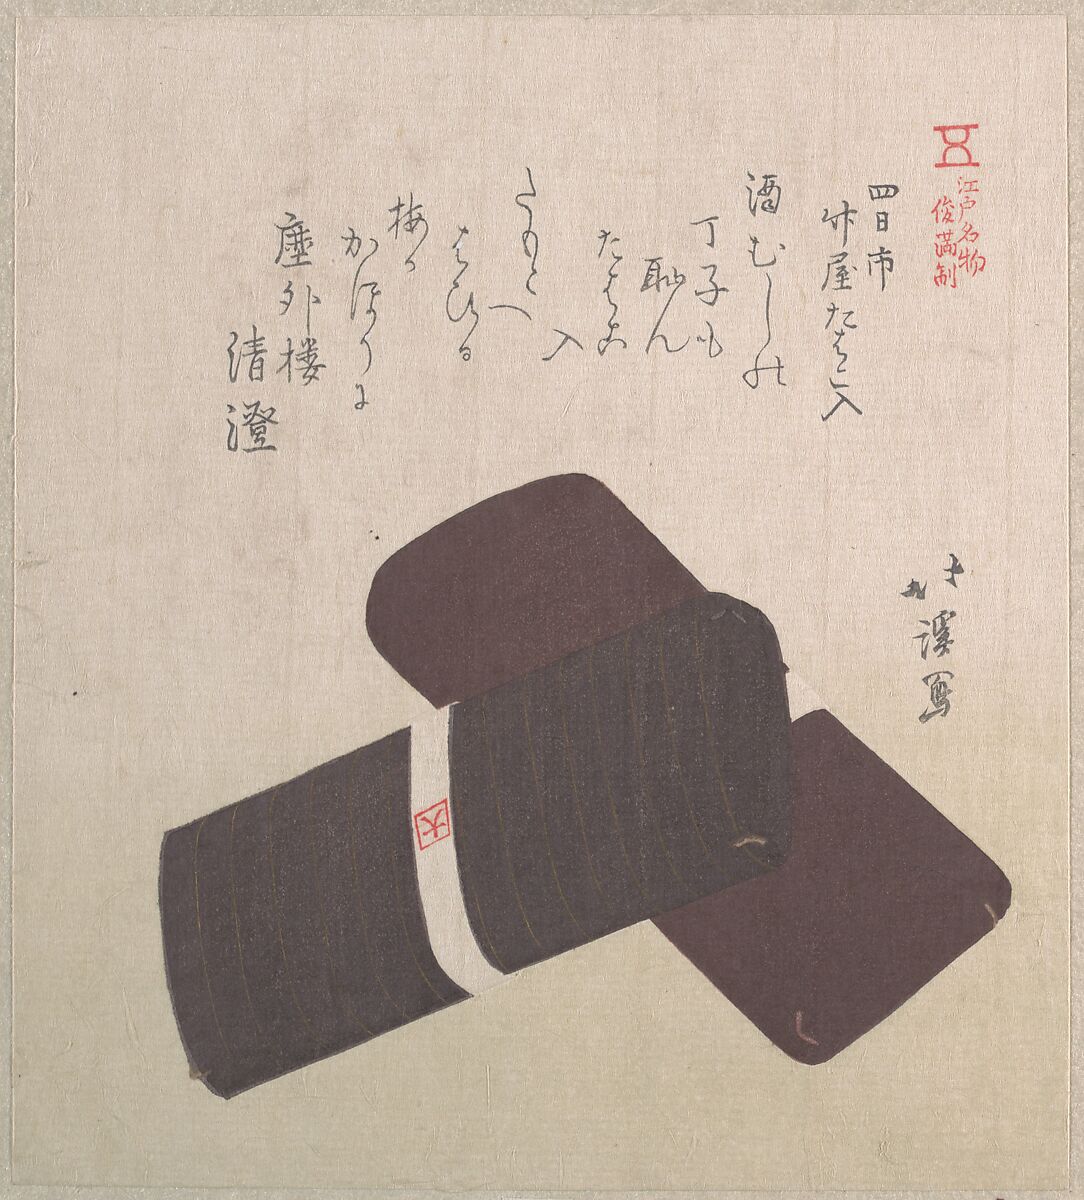 Tobacco Pouches; Specialities of Takaya in Yokkaichi, Totoya Hokkei (Japanese, 1780–1850), Part of an album of woodblock prints (surimono); ink and color on paper, Japan 